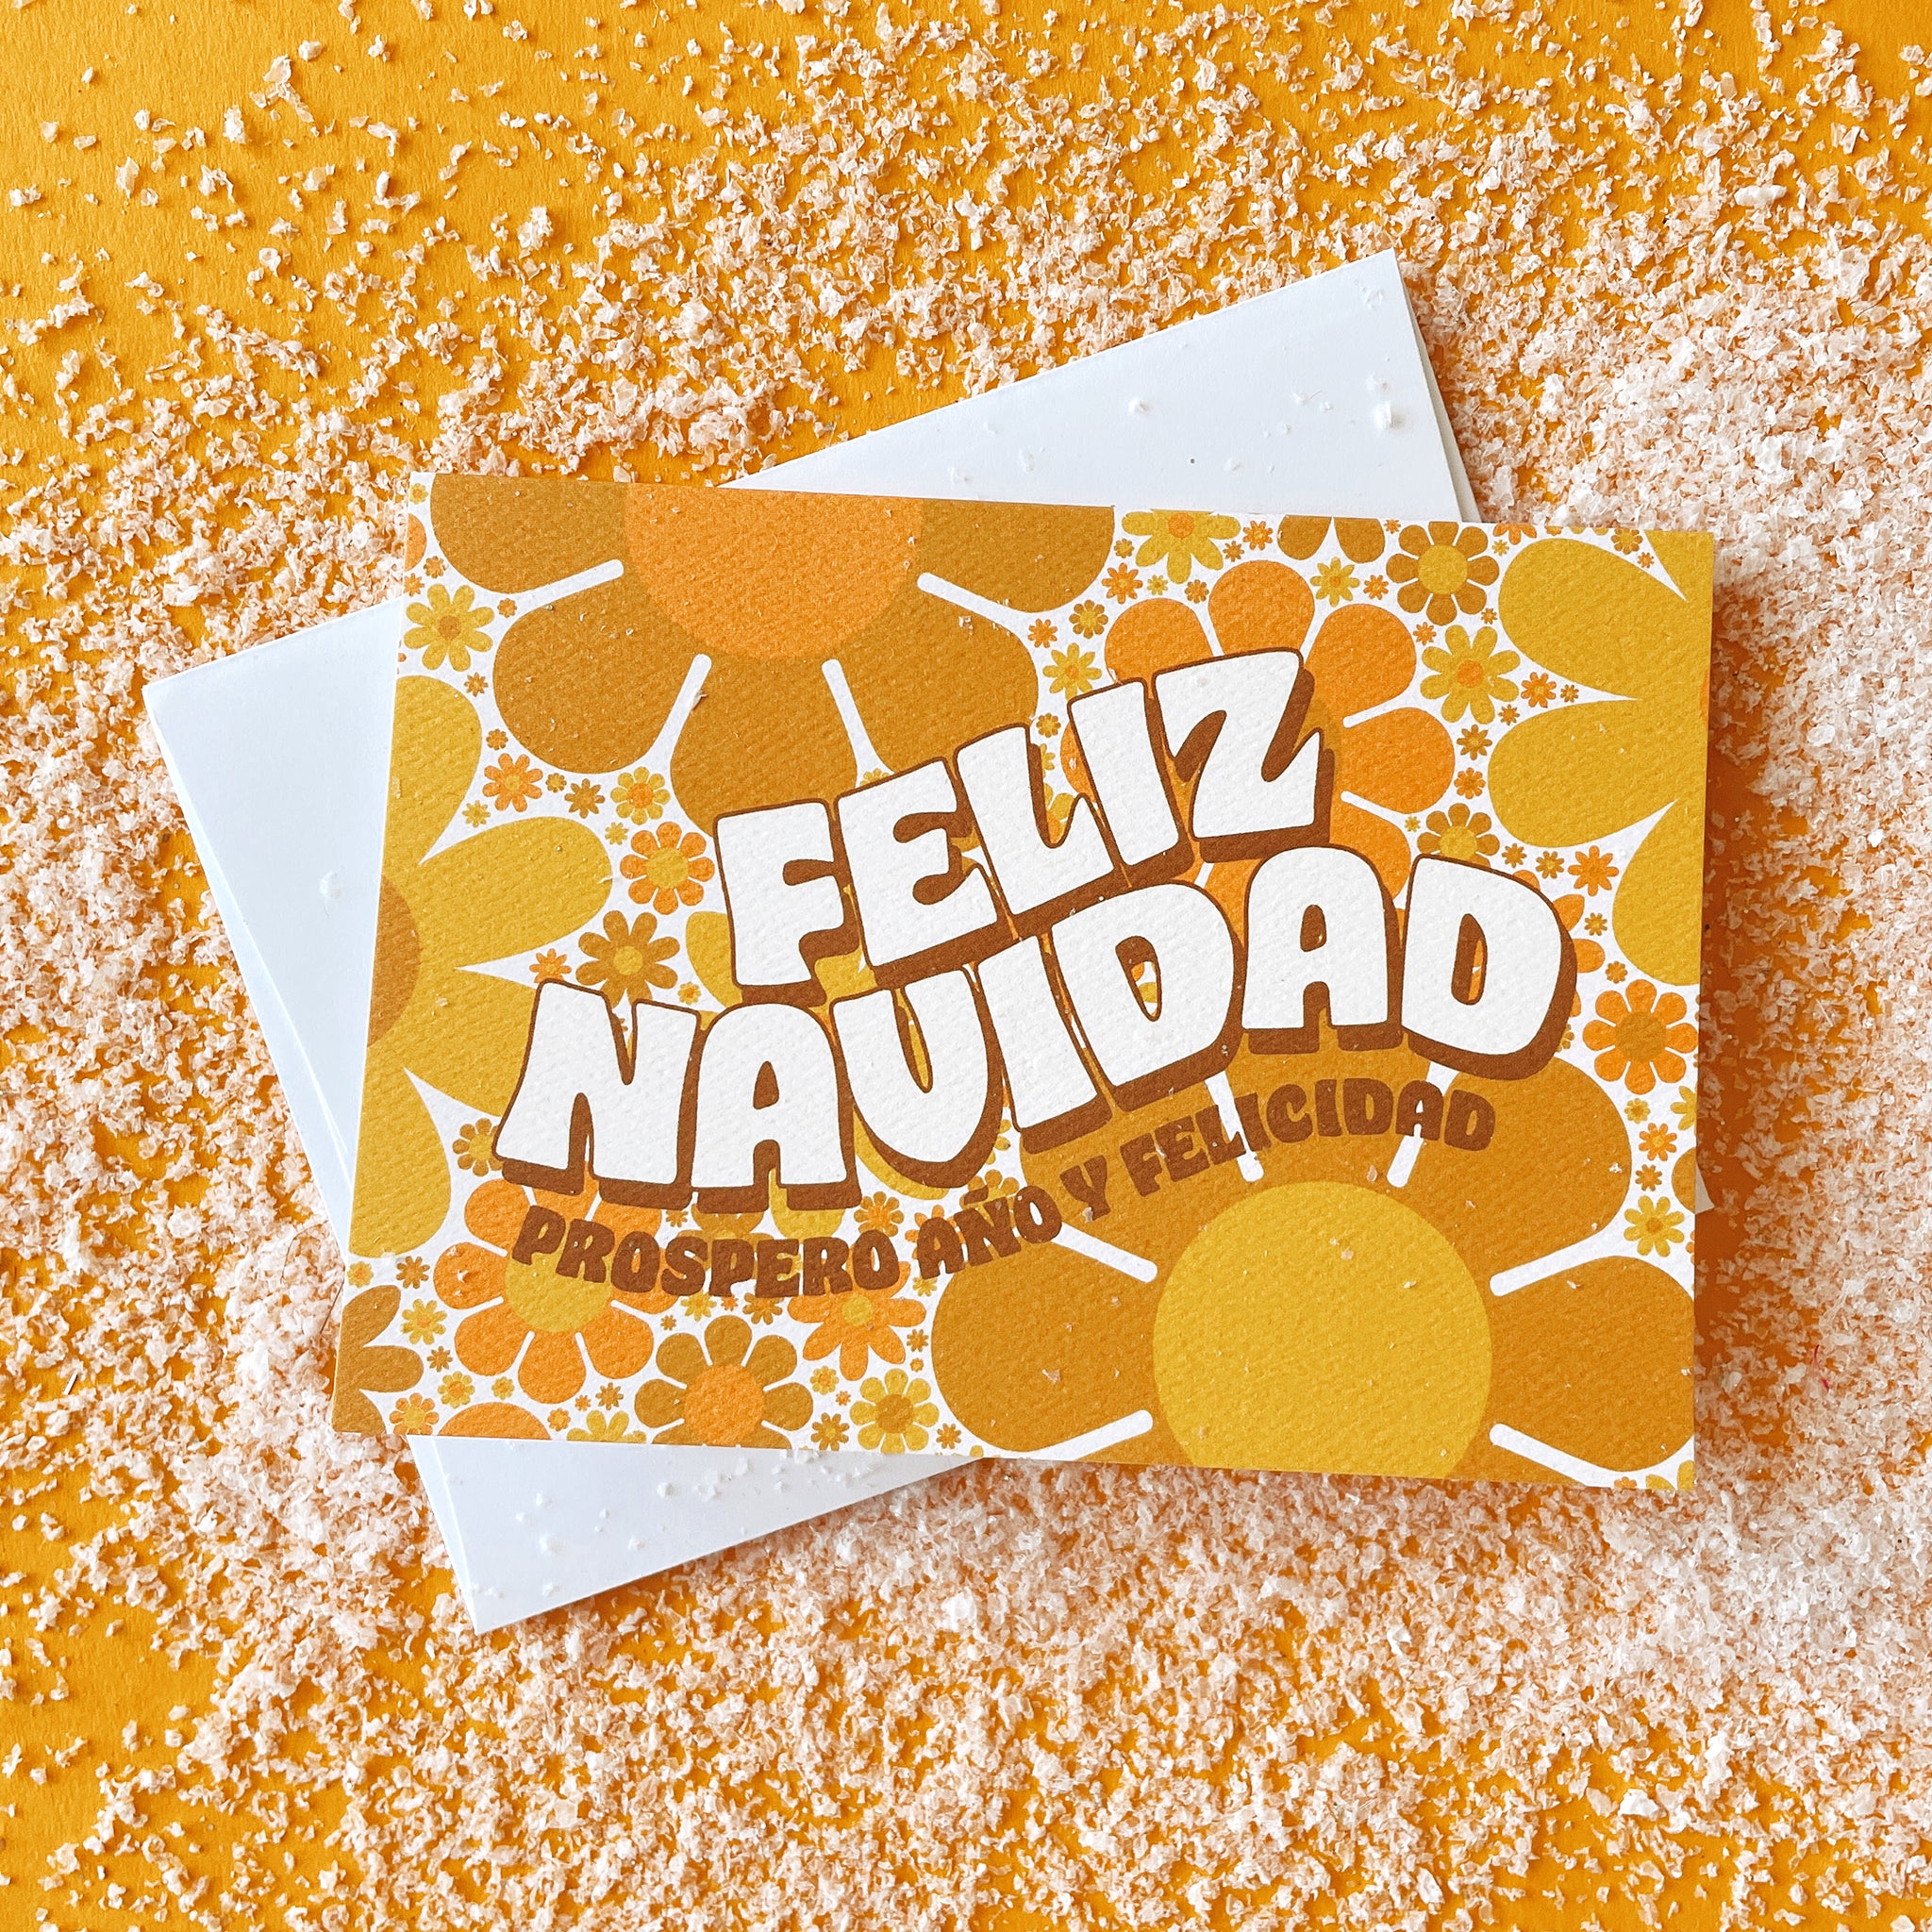 Greeting card filled with yellow and orange retro flower print. The card reads &#39;Feliz Navidad&#39; in white curved bubble letters. Below reads &#39;prosper año y felicidad&#39; in rust colored lettering. The card is accompanied by a solid white envelope.